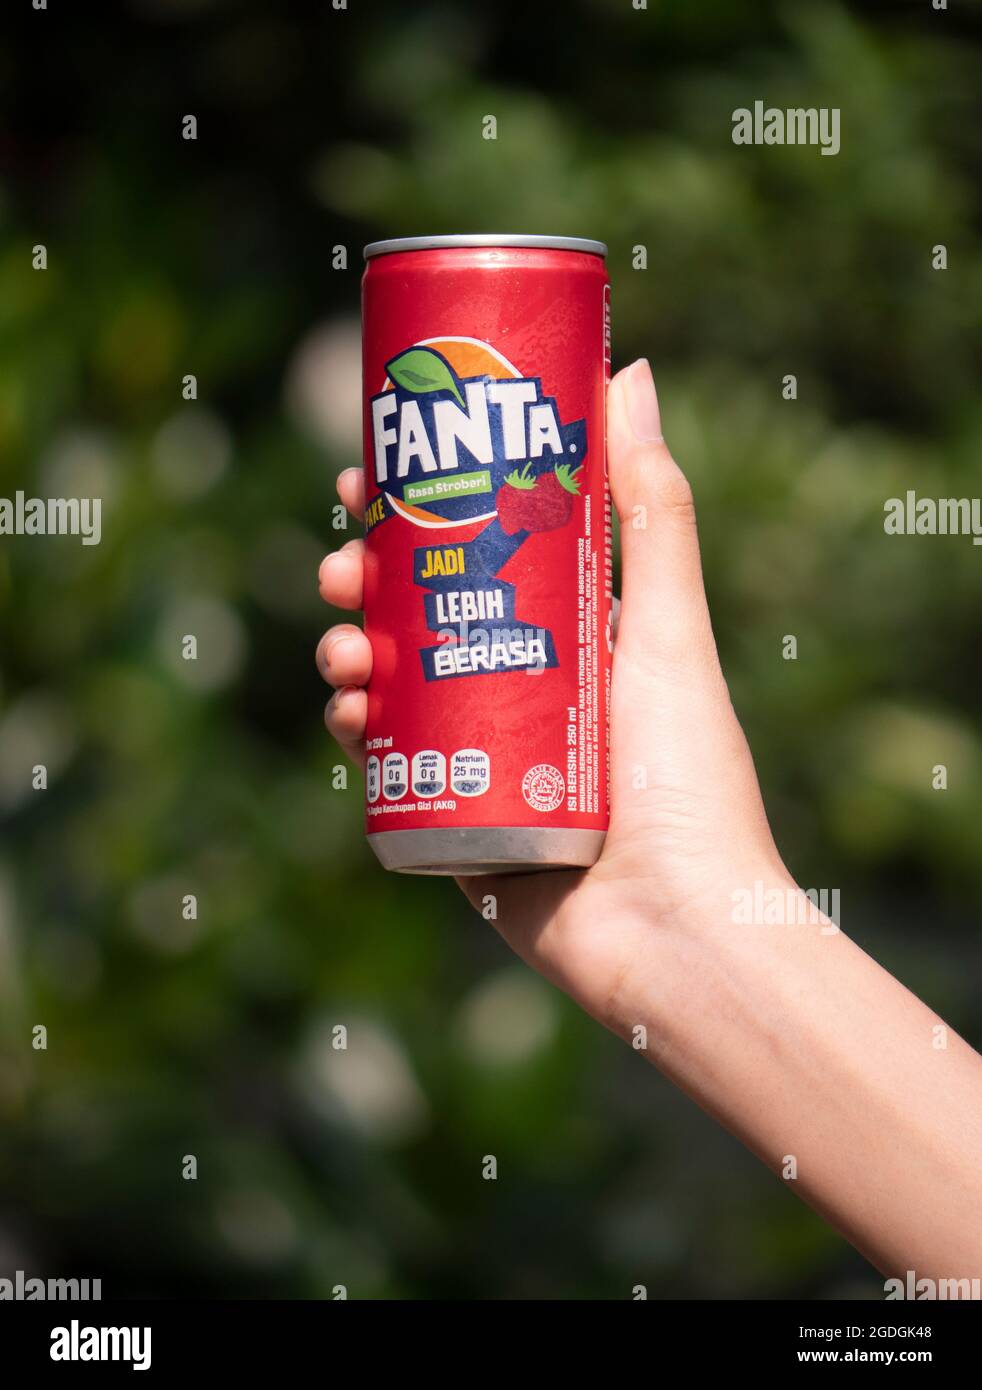 Jakarta, Indonesia-August 13, 2021: close up of a hand holding a soft drink can on a blurry leaf background Stock Photo